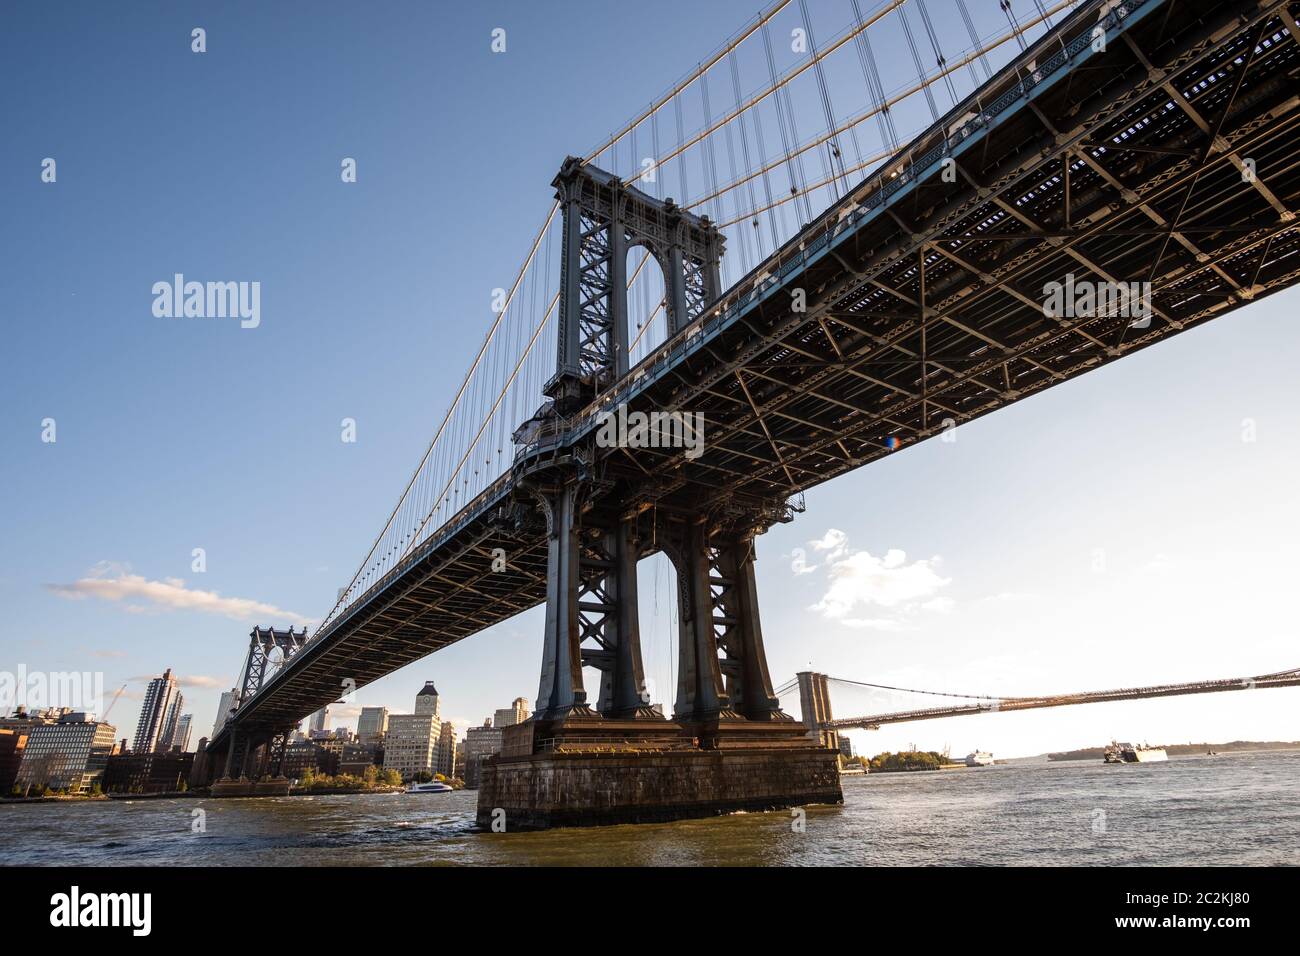 Manhattan Bridge in daylight view from Lower East Side waterfront Stock Photo